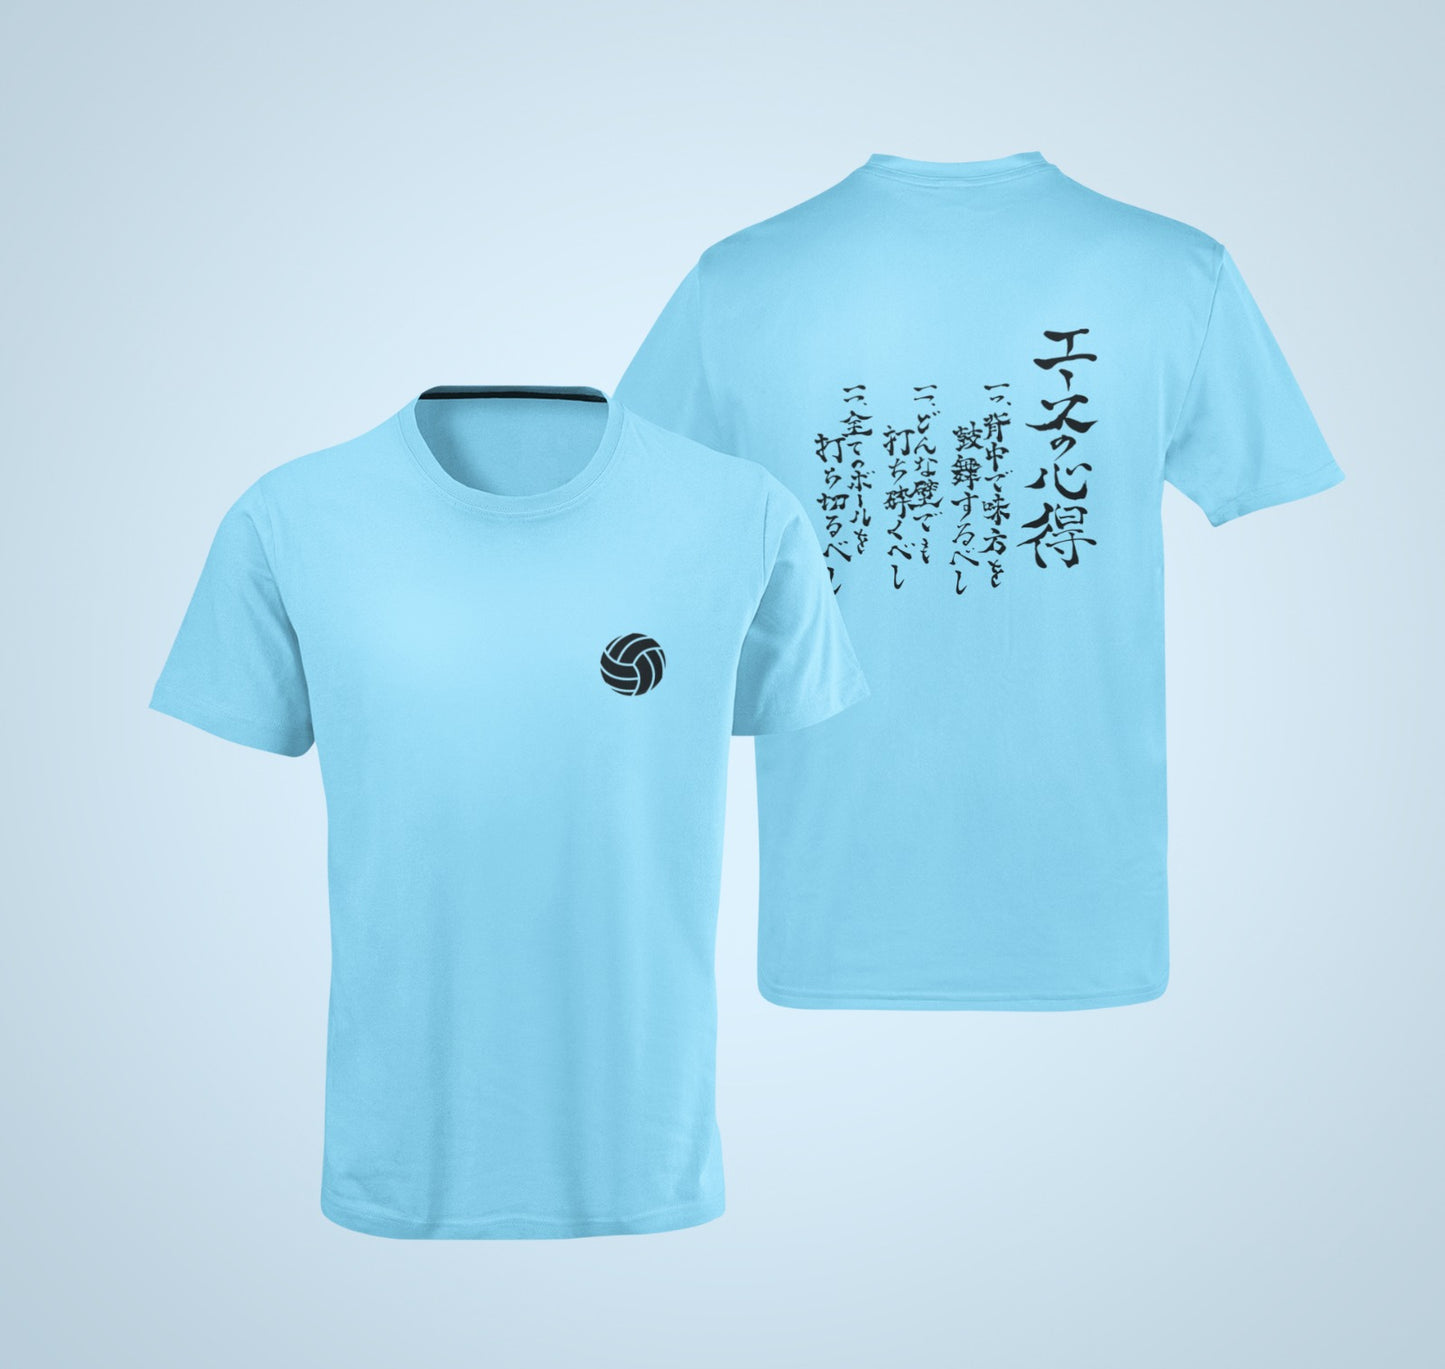 Get the best of both worlds with our blue t-shirt featuring a vibrant volleyball design on the front and the iconic Ace of Haikyuu anime slogan in Japanese on the back. Made with high-quality materials, this comfortable and durable t-shirt is perfect for any Haikyuu fan. Order now and show off your love for volleyball and anime!